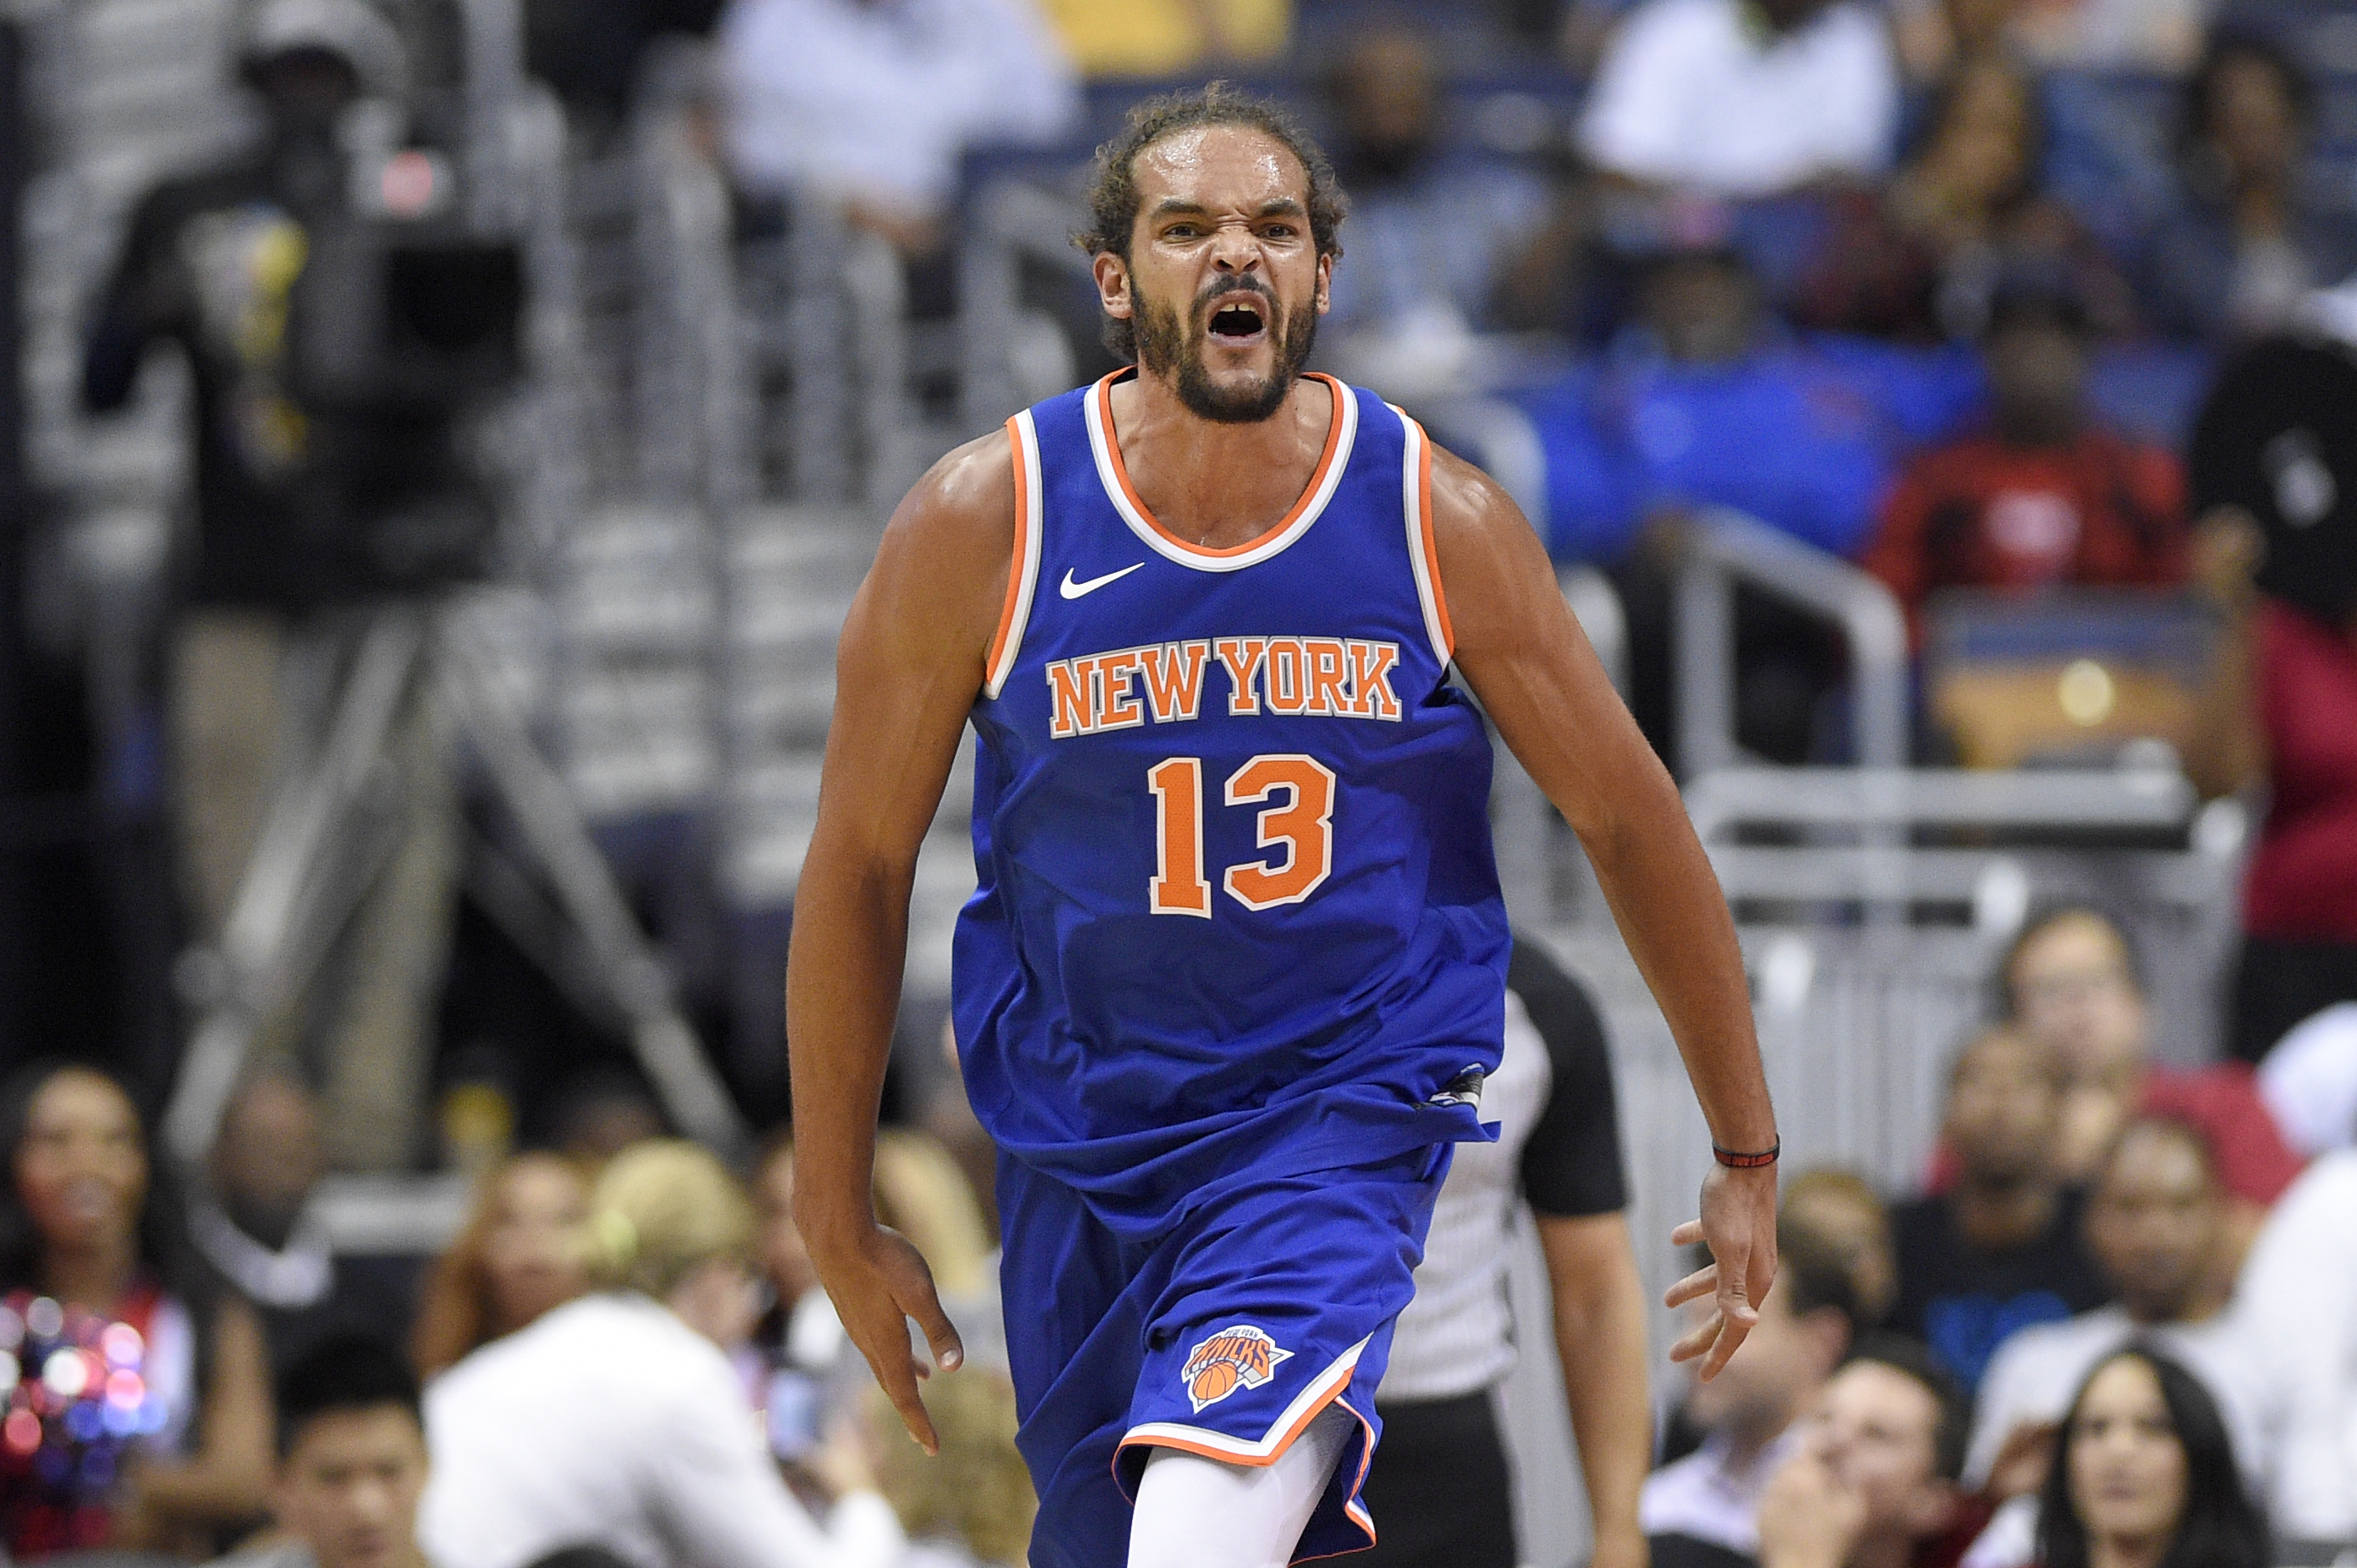 No shortcuts: All-Star Joakim Noah's passion leads to success on and off  the court